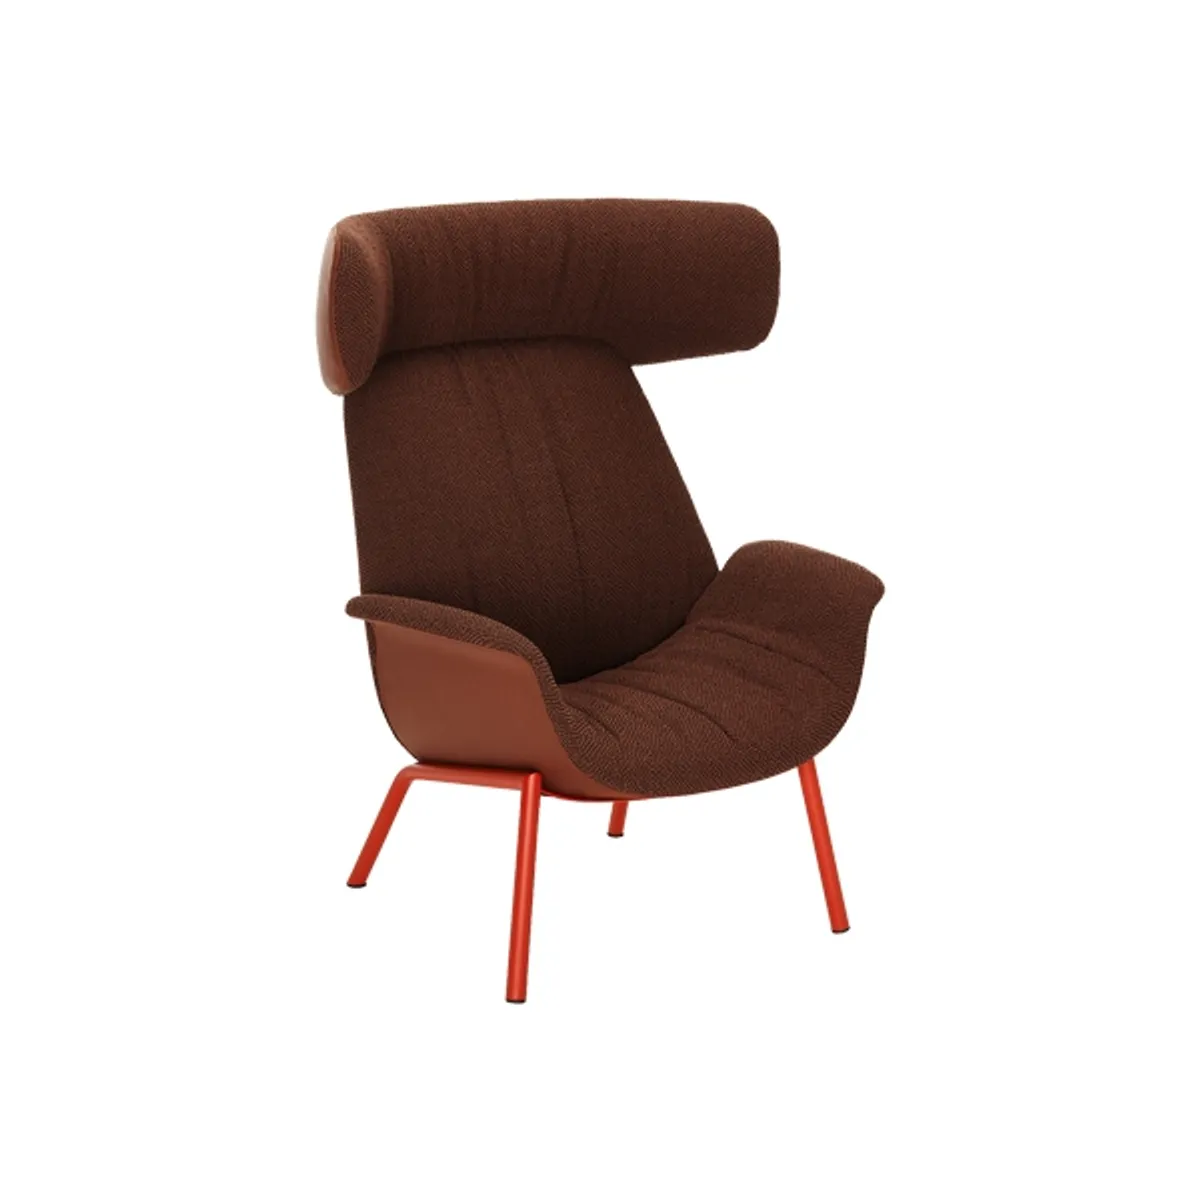 Ilawingbackloungechair Inside Out Contracts5